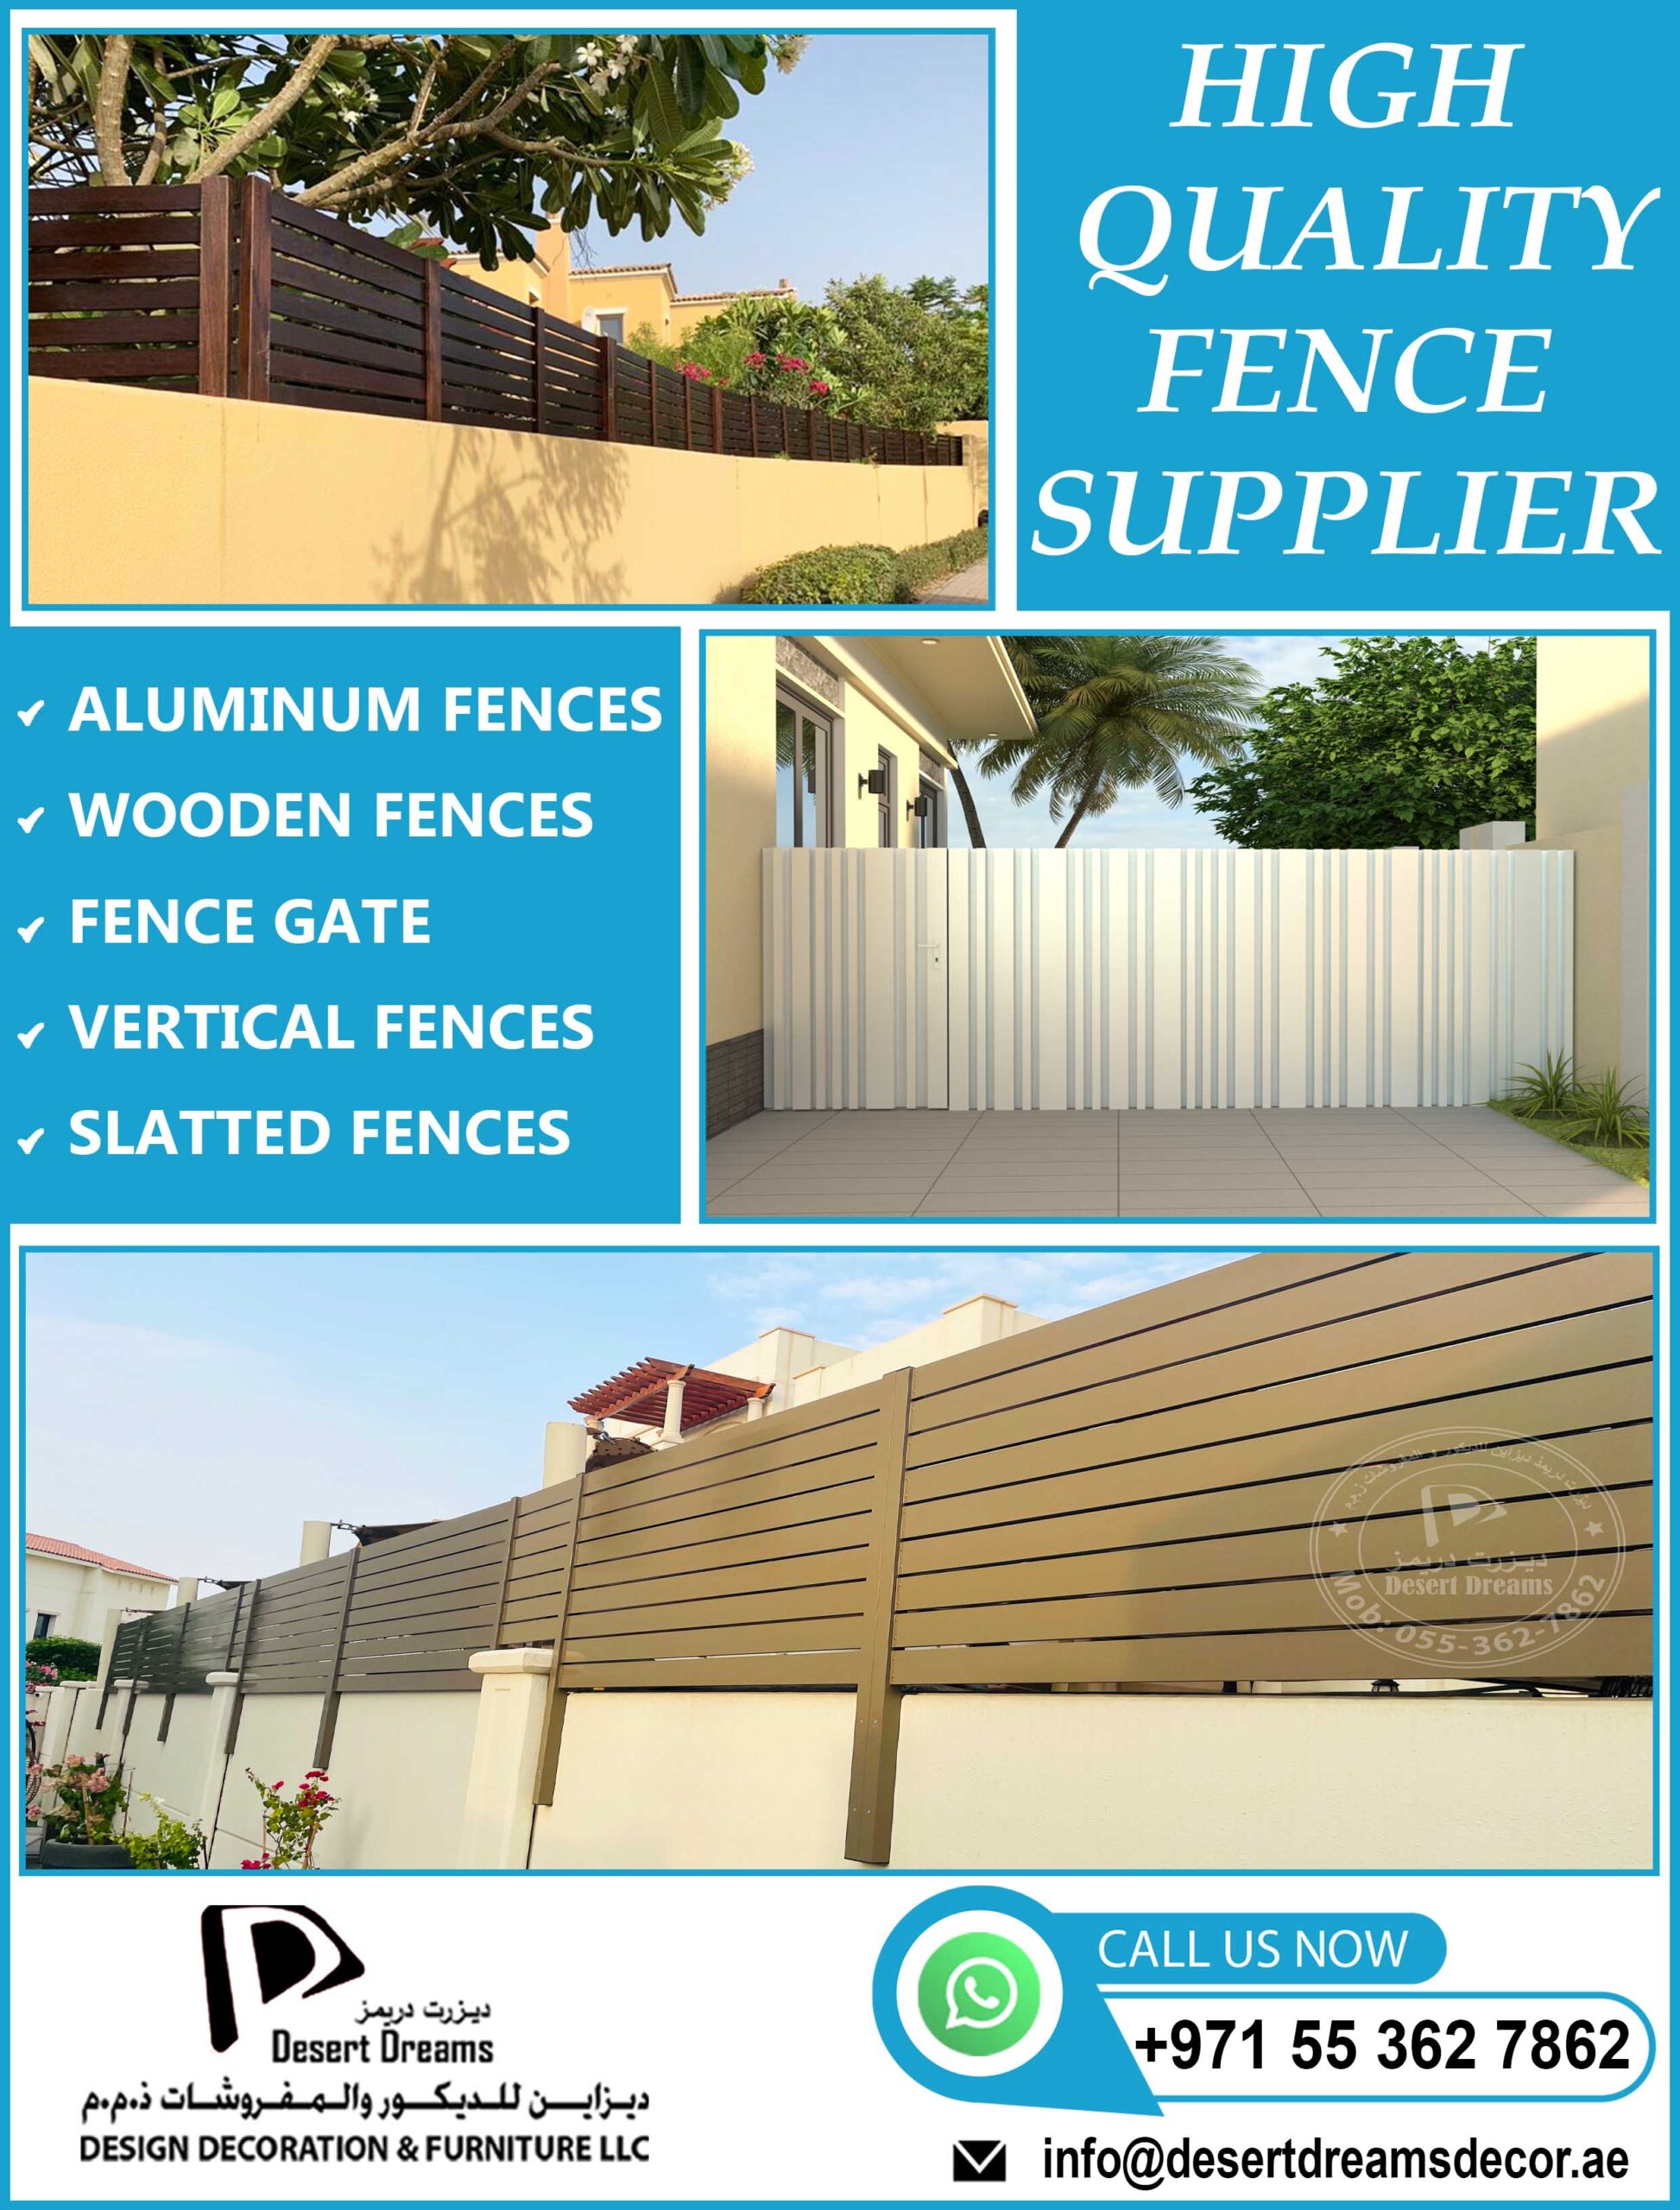 Supply and Fixing Garden Fence Uae | Aluminum and Wooden Fences.